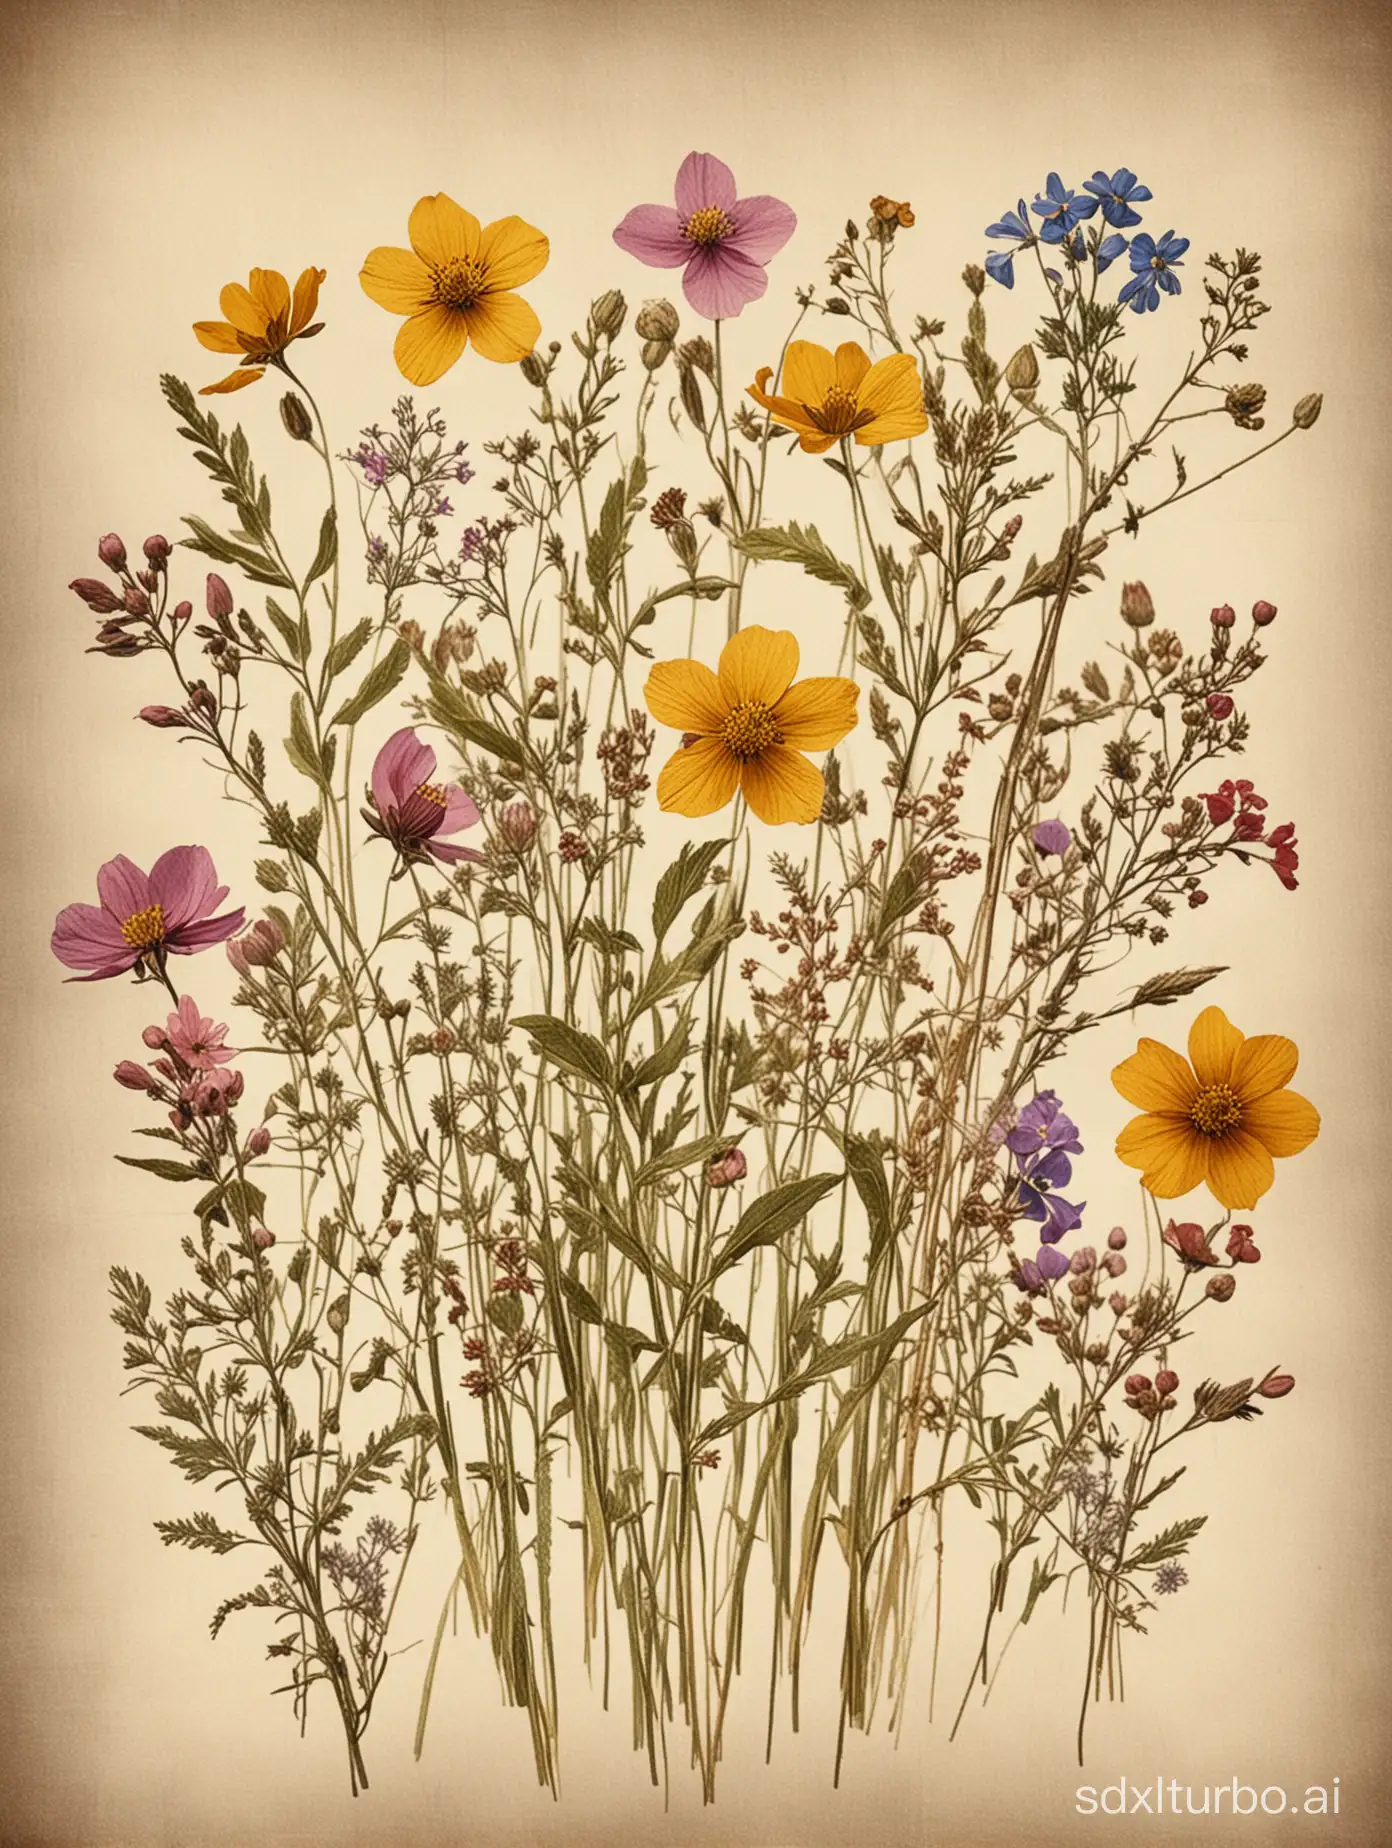 A beautiful image of pressed wild flowers in a vintage style.